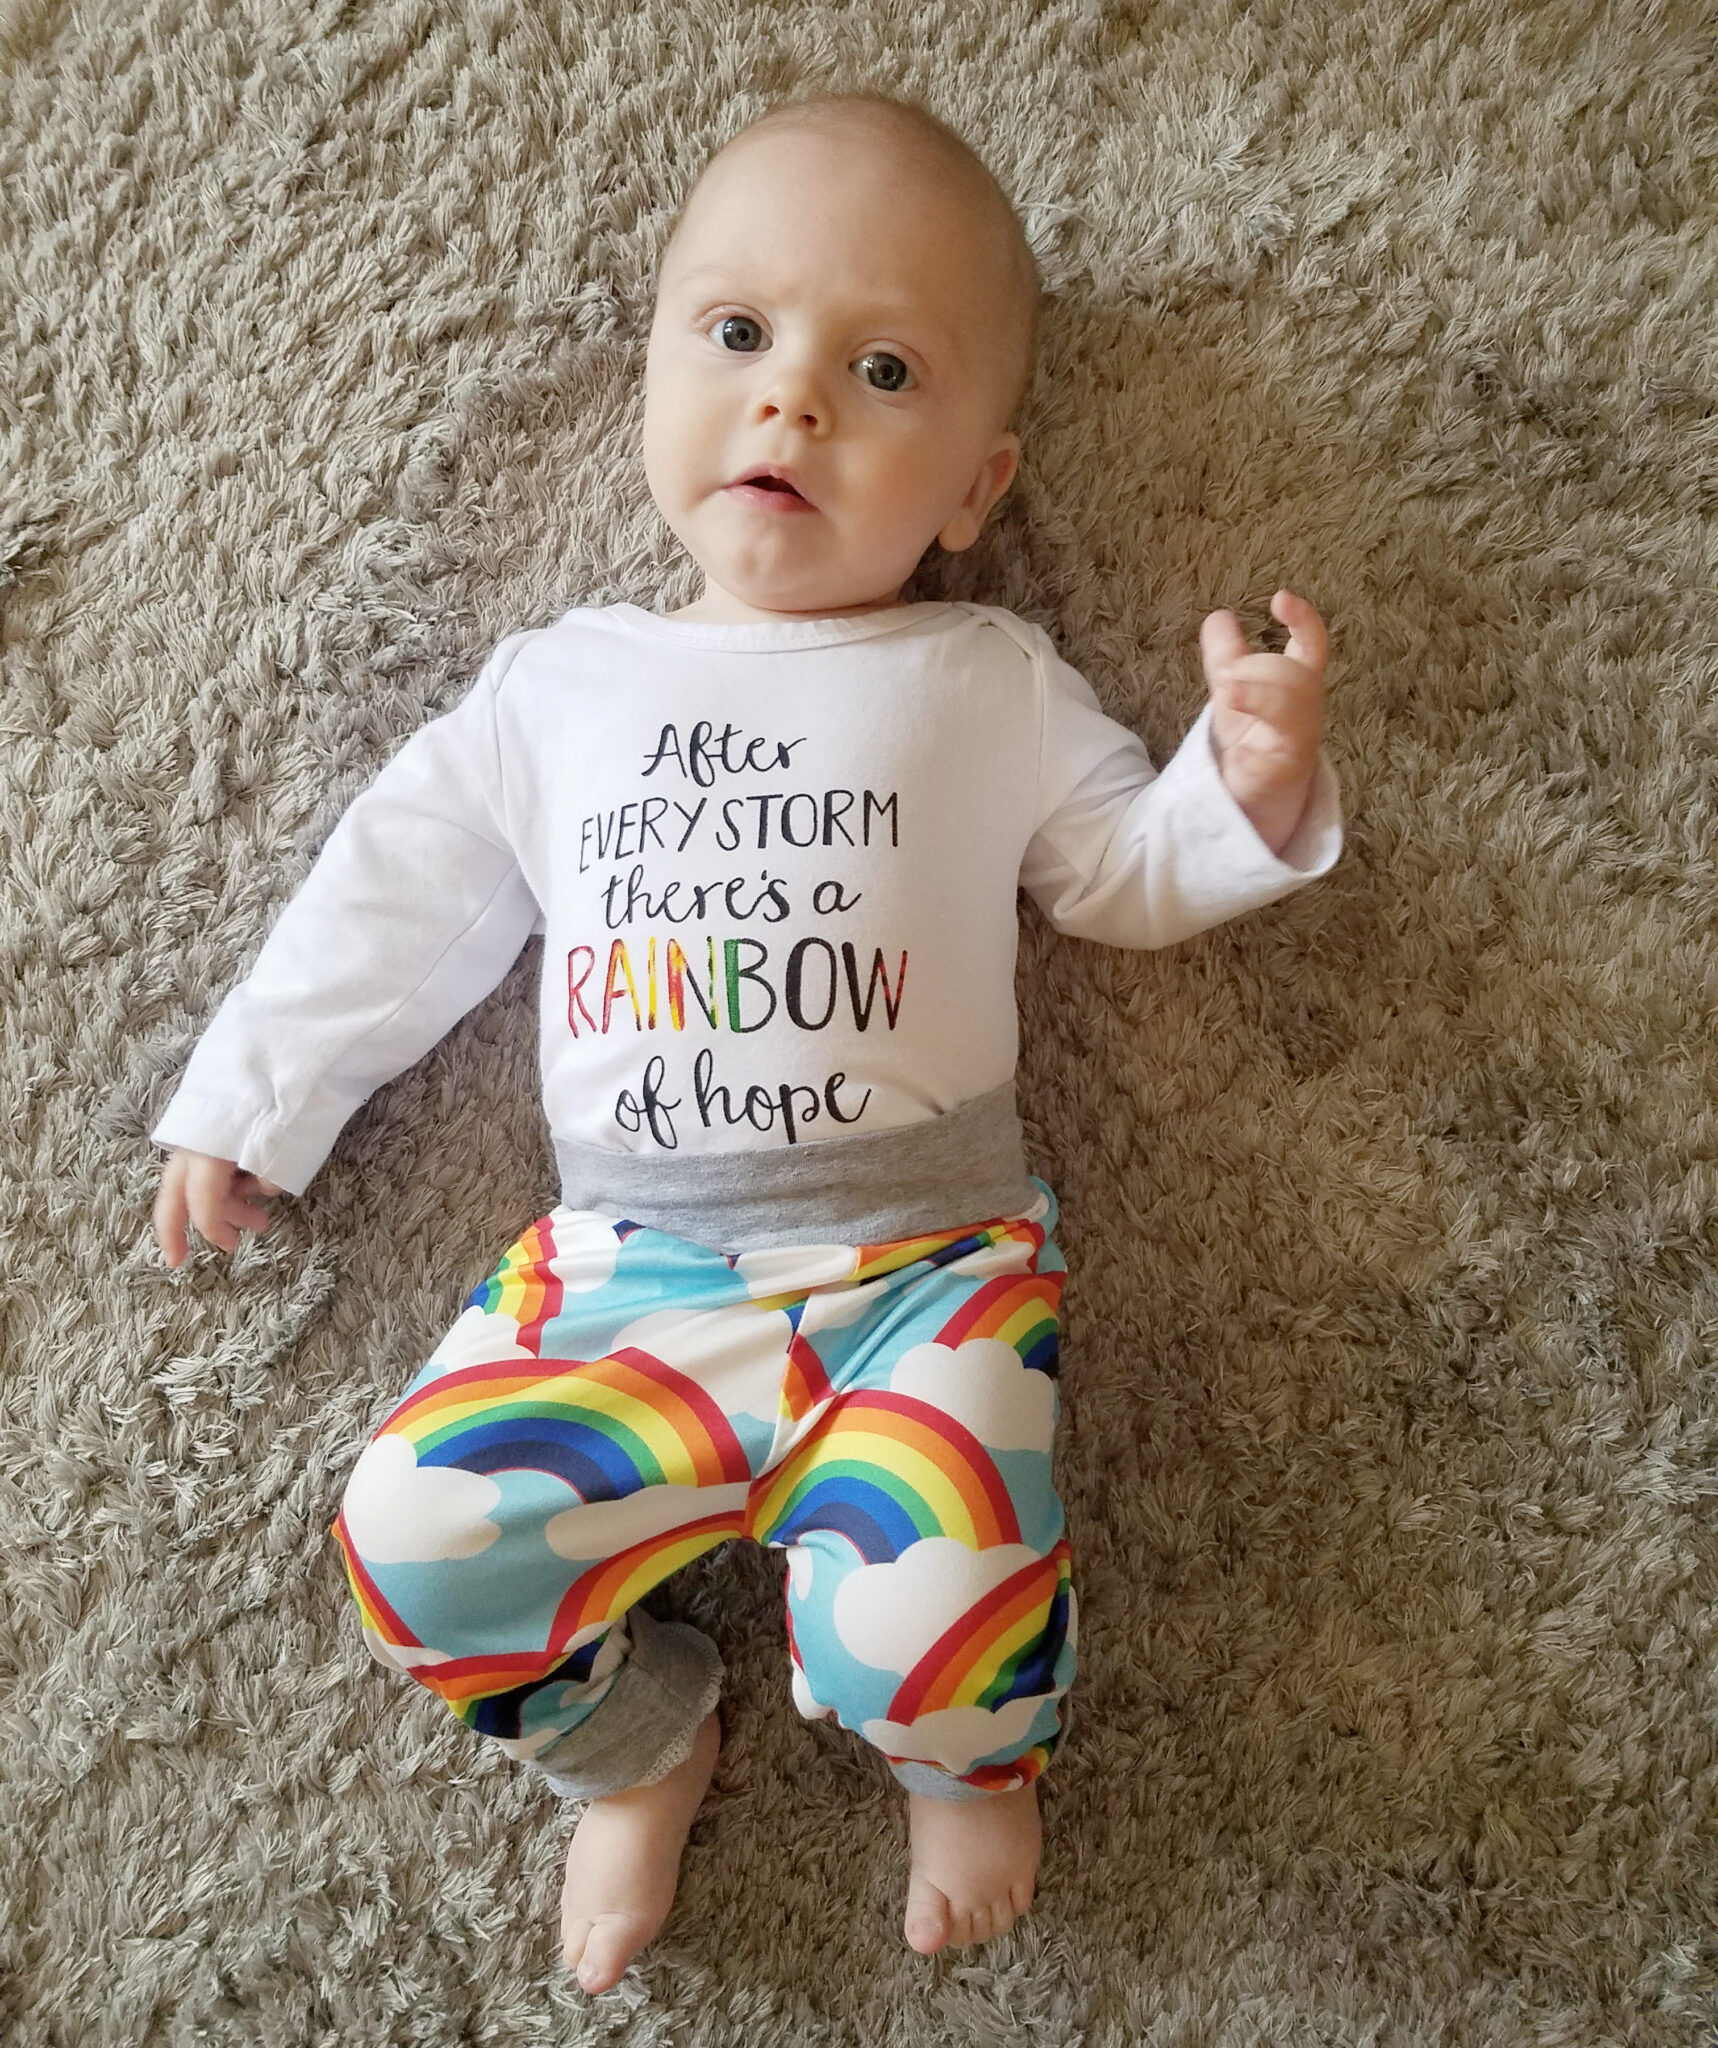 infant laying on the floor wearing rainbow pants and a white shirt that says, "after every storm there's a rainbow of hope"